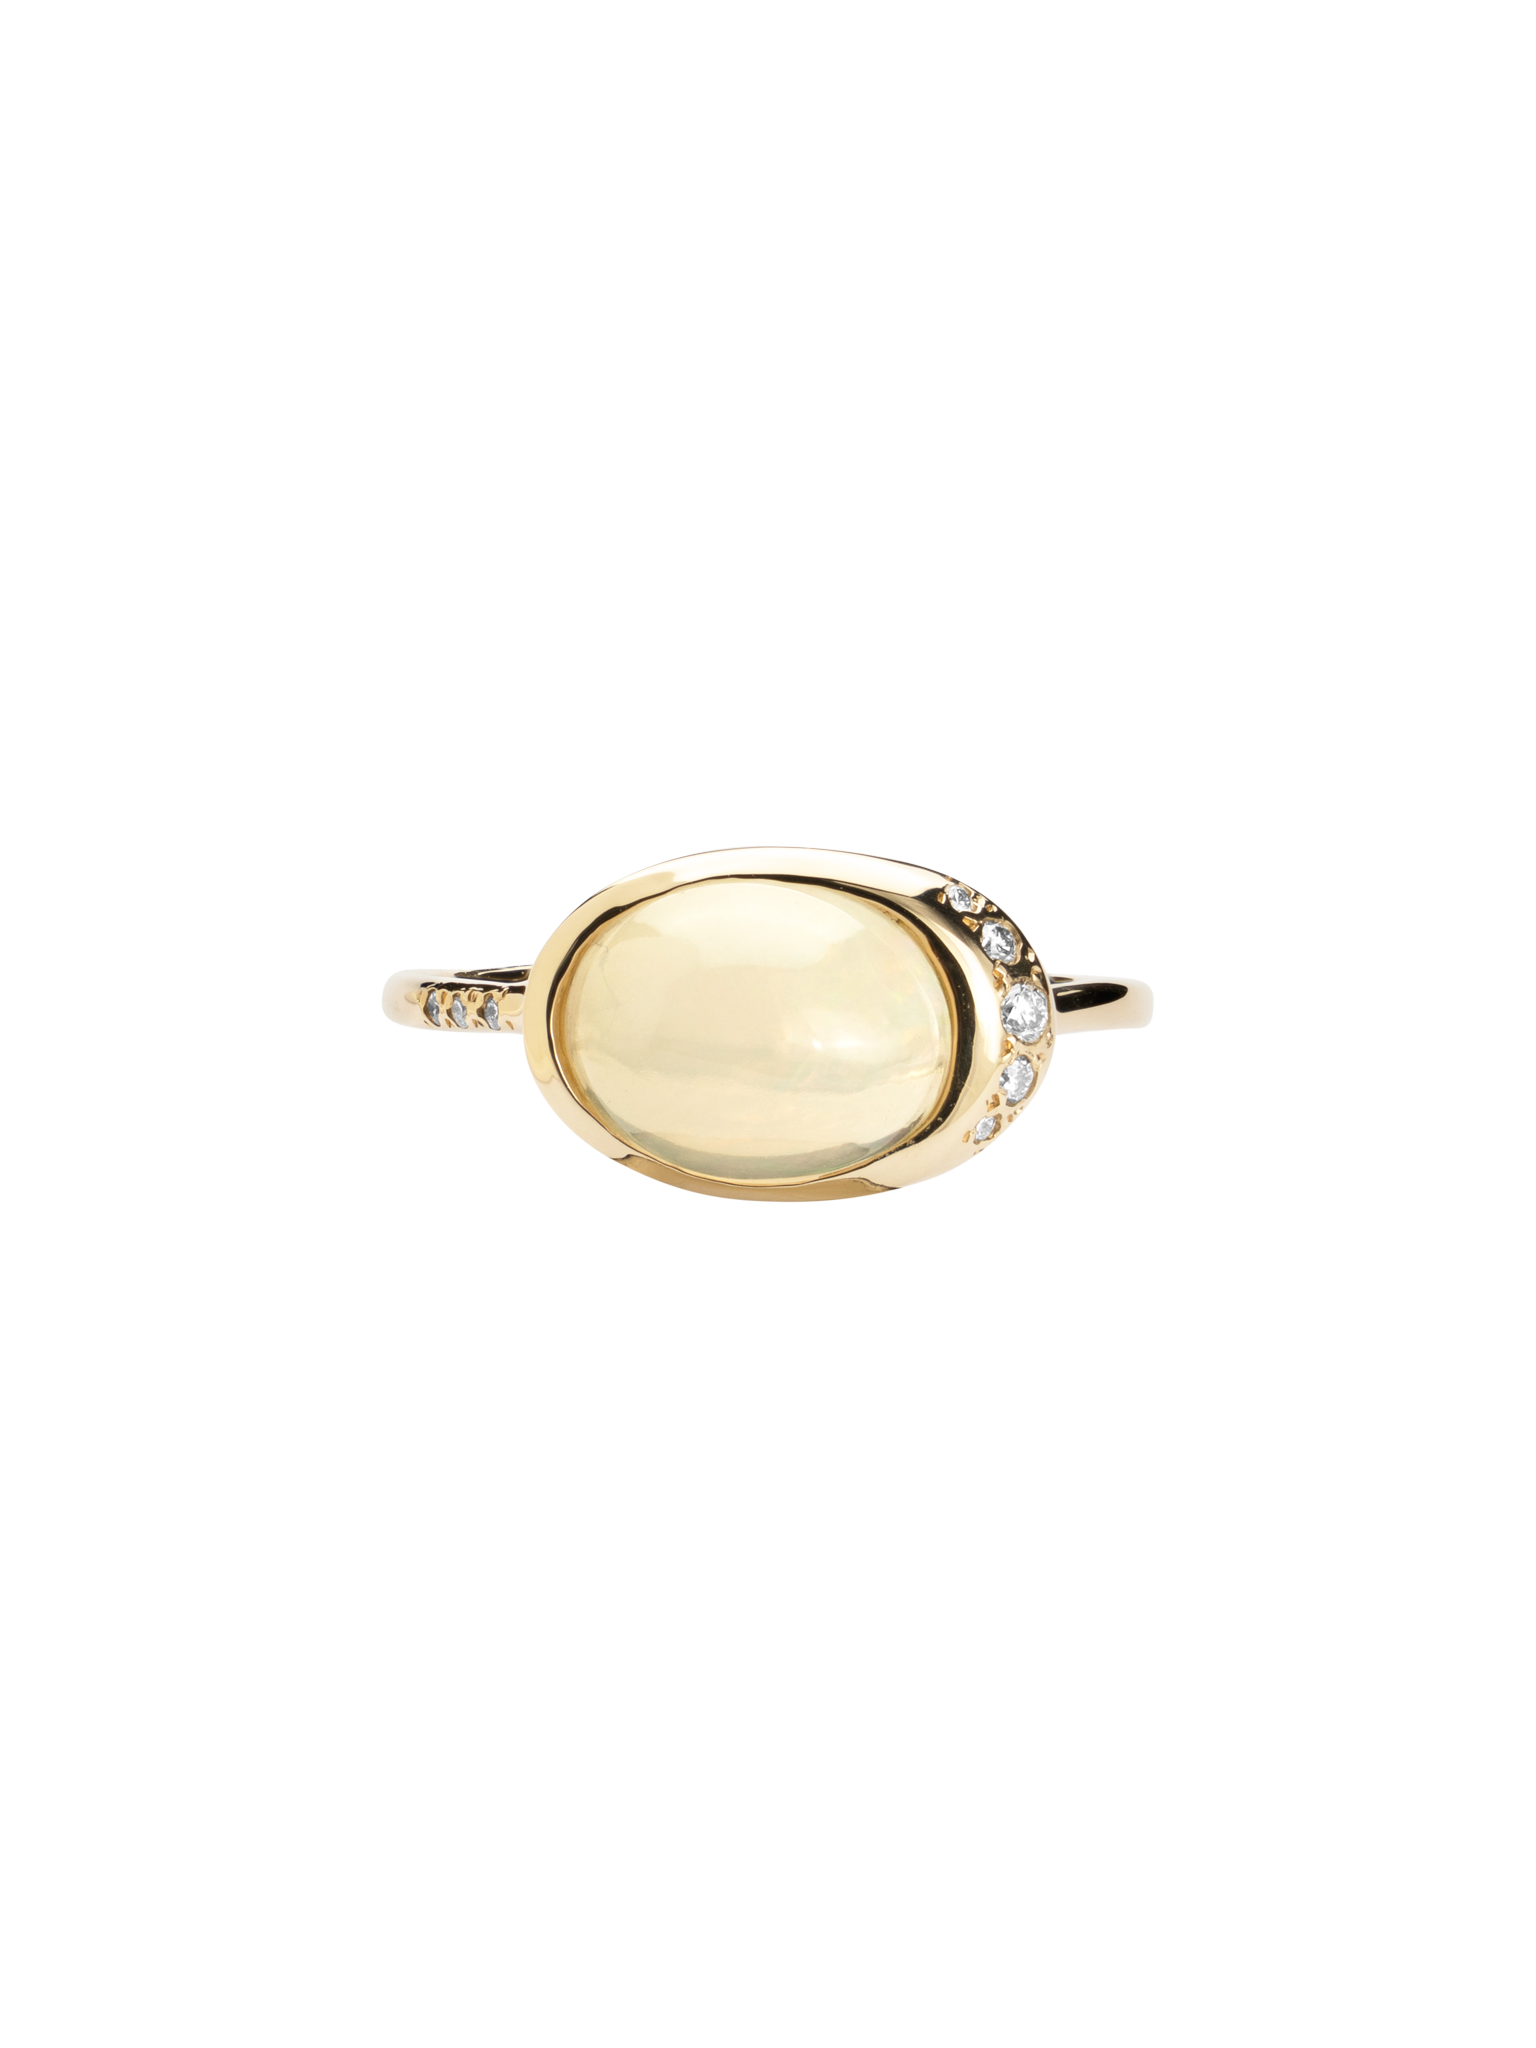 The alice opal ring